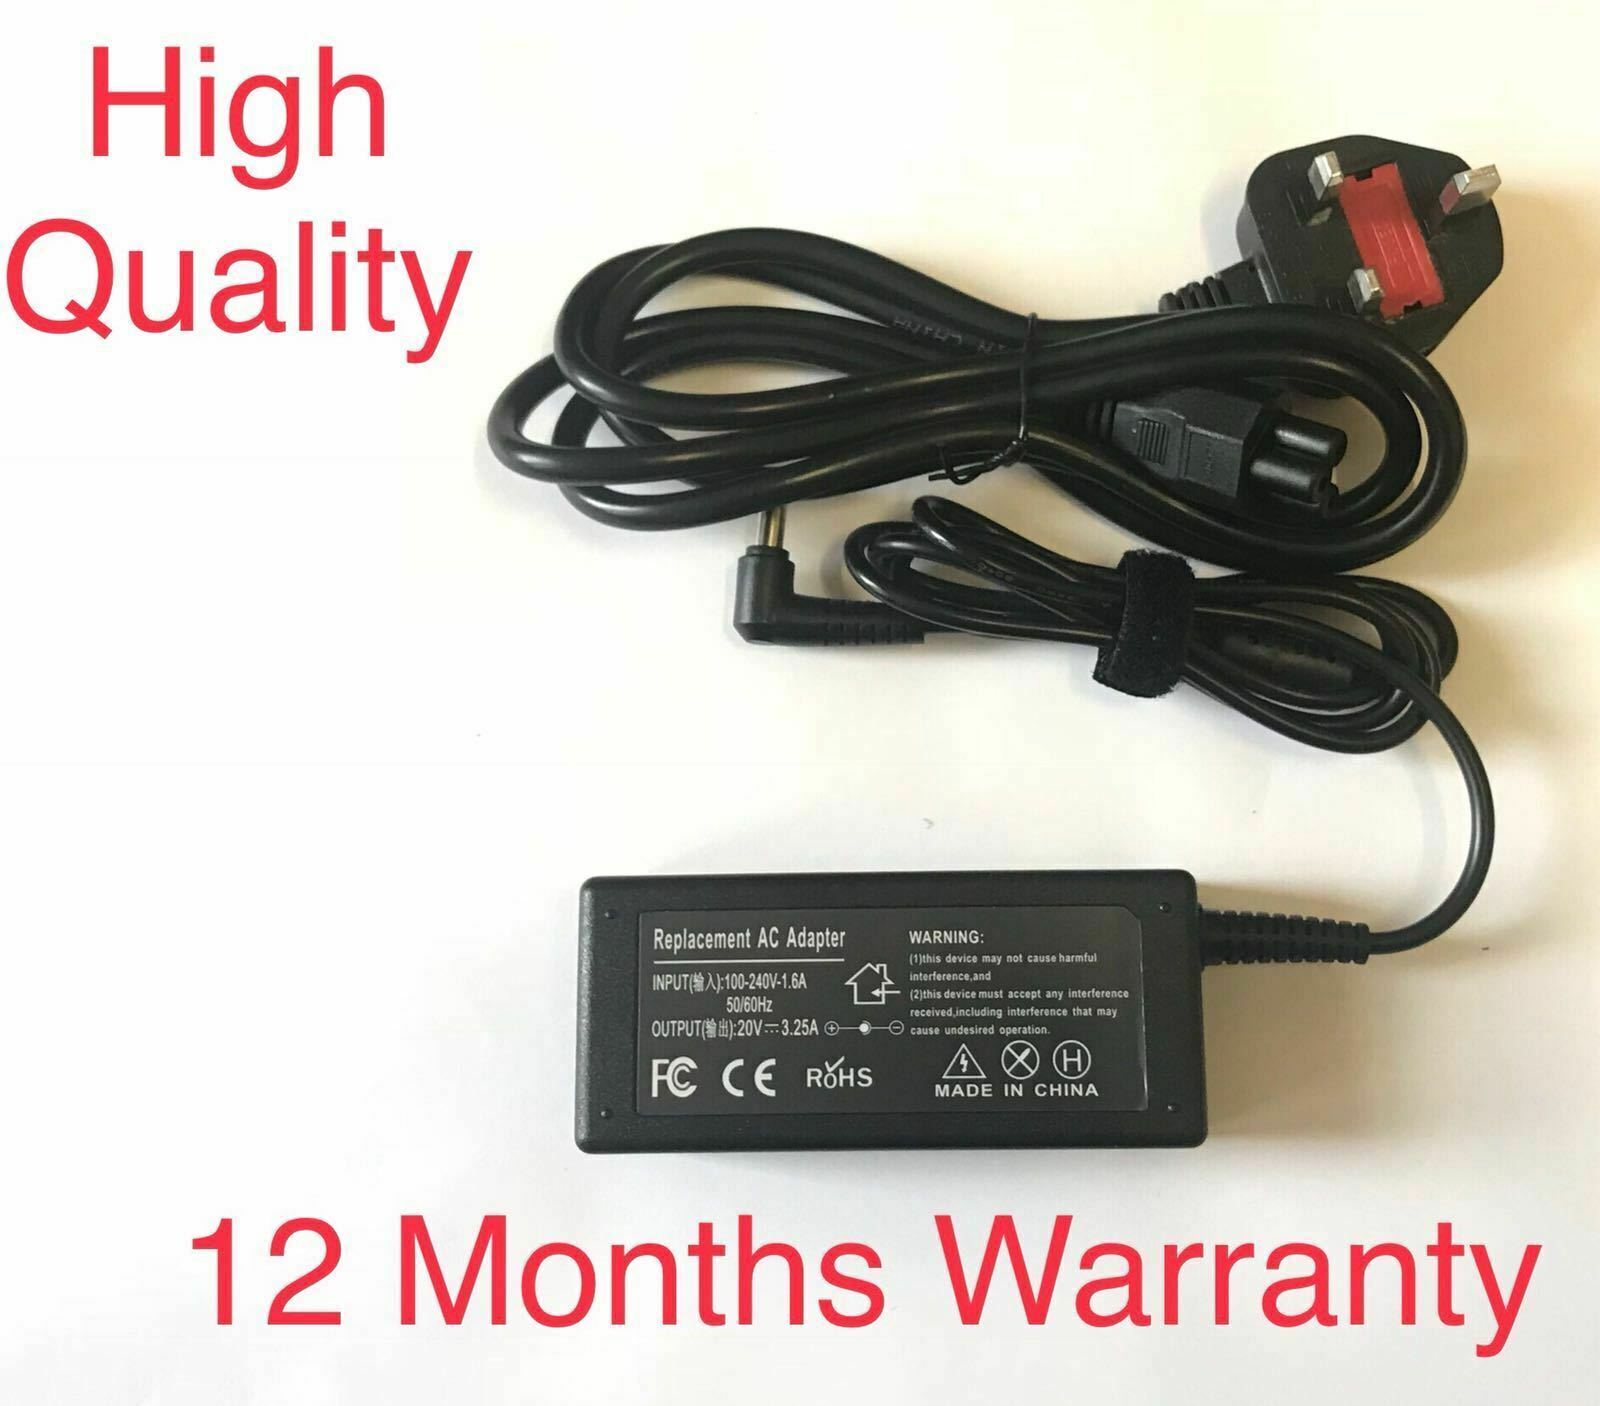 New AC ADAPTER CHARGER POWER SUPPLY CORD for Zebra LP2122 LP2642 LP2242 FSP50-11 